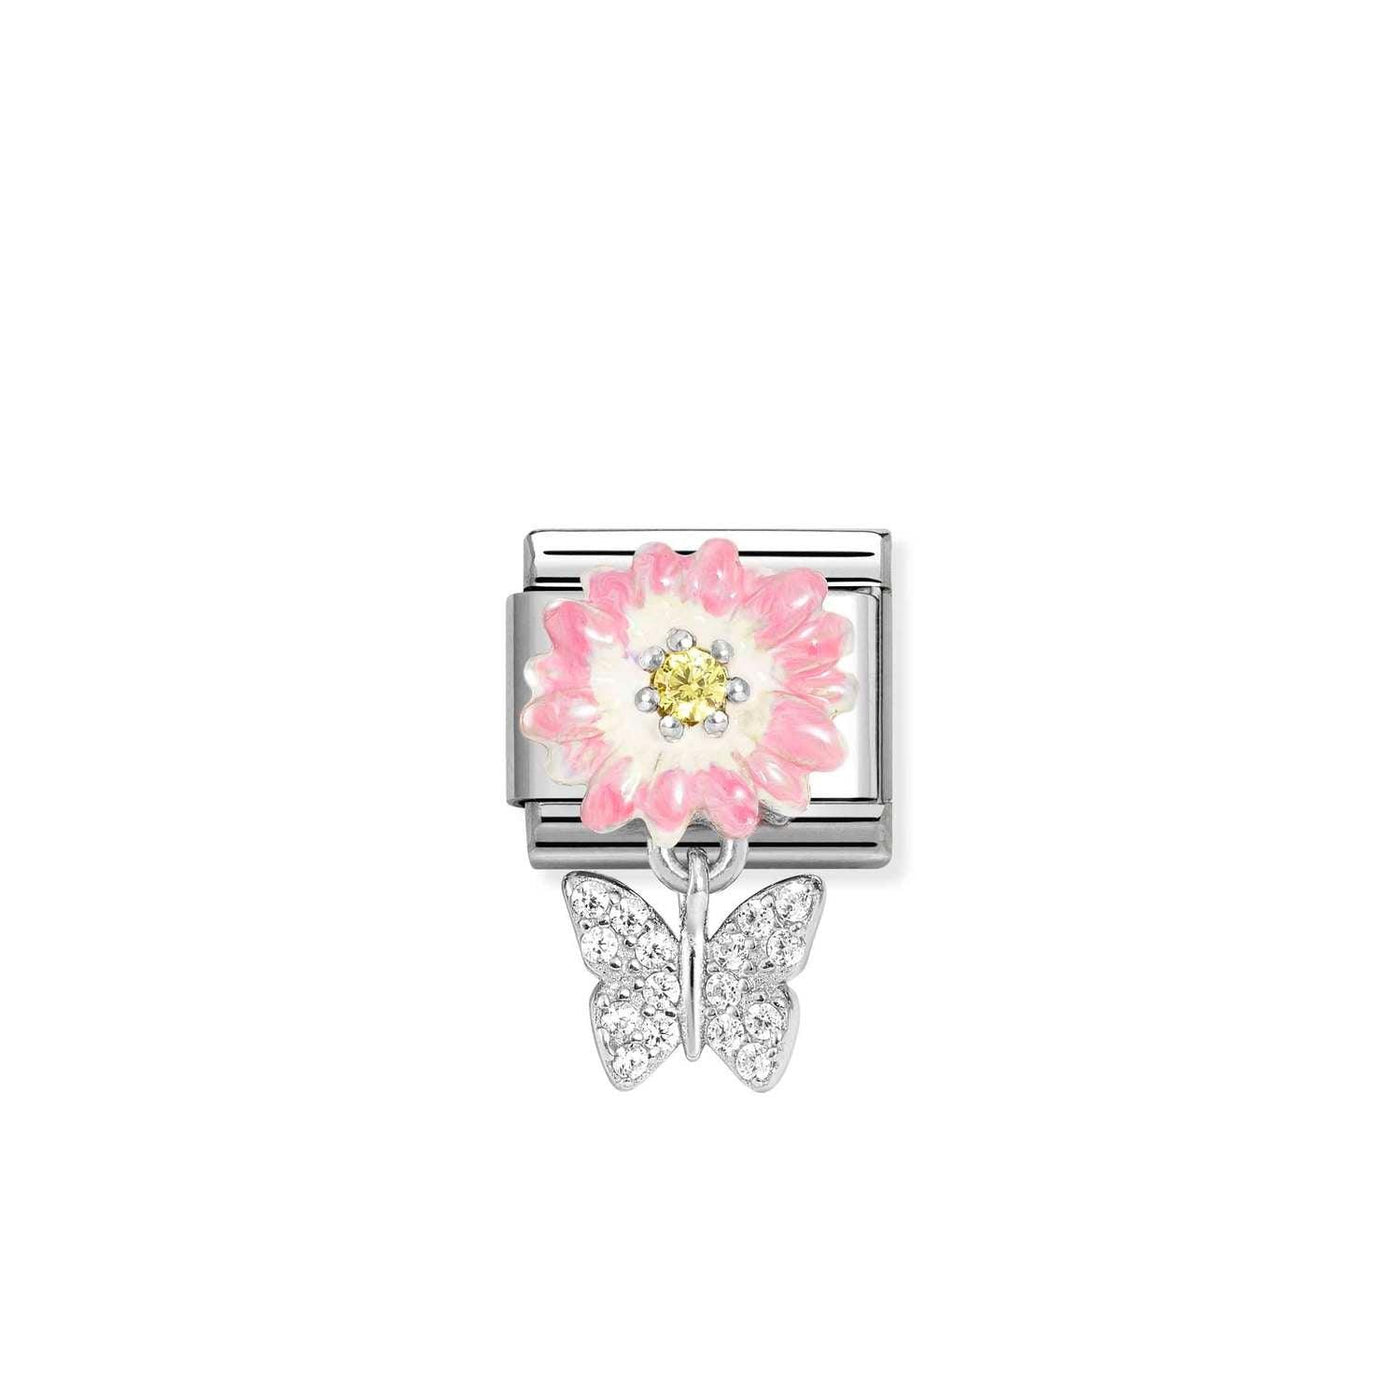 Nomination Pink Daisy with Crystal Butterfly Charm